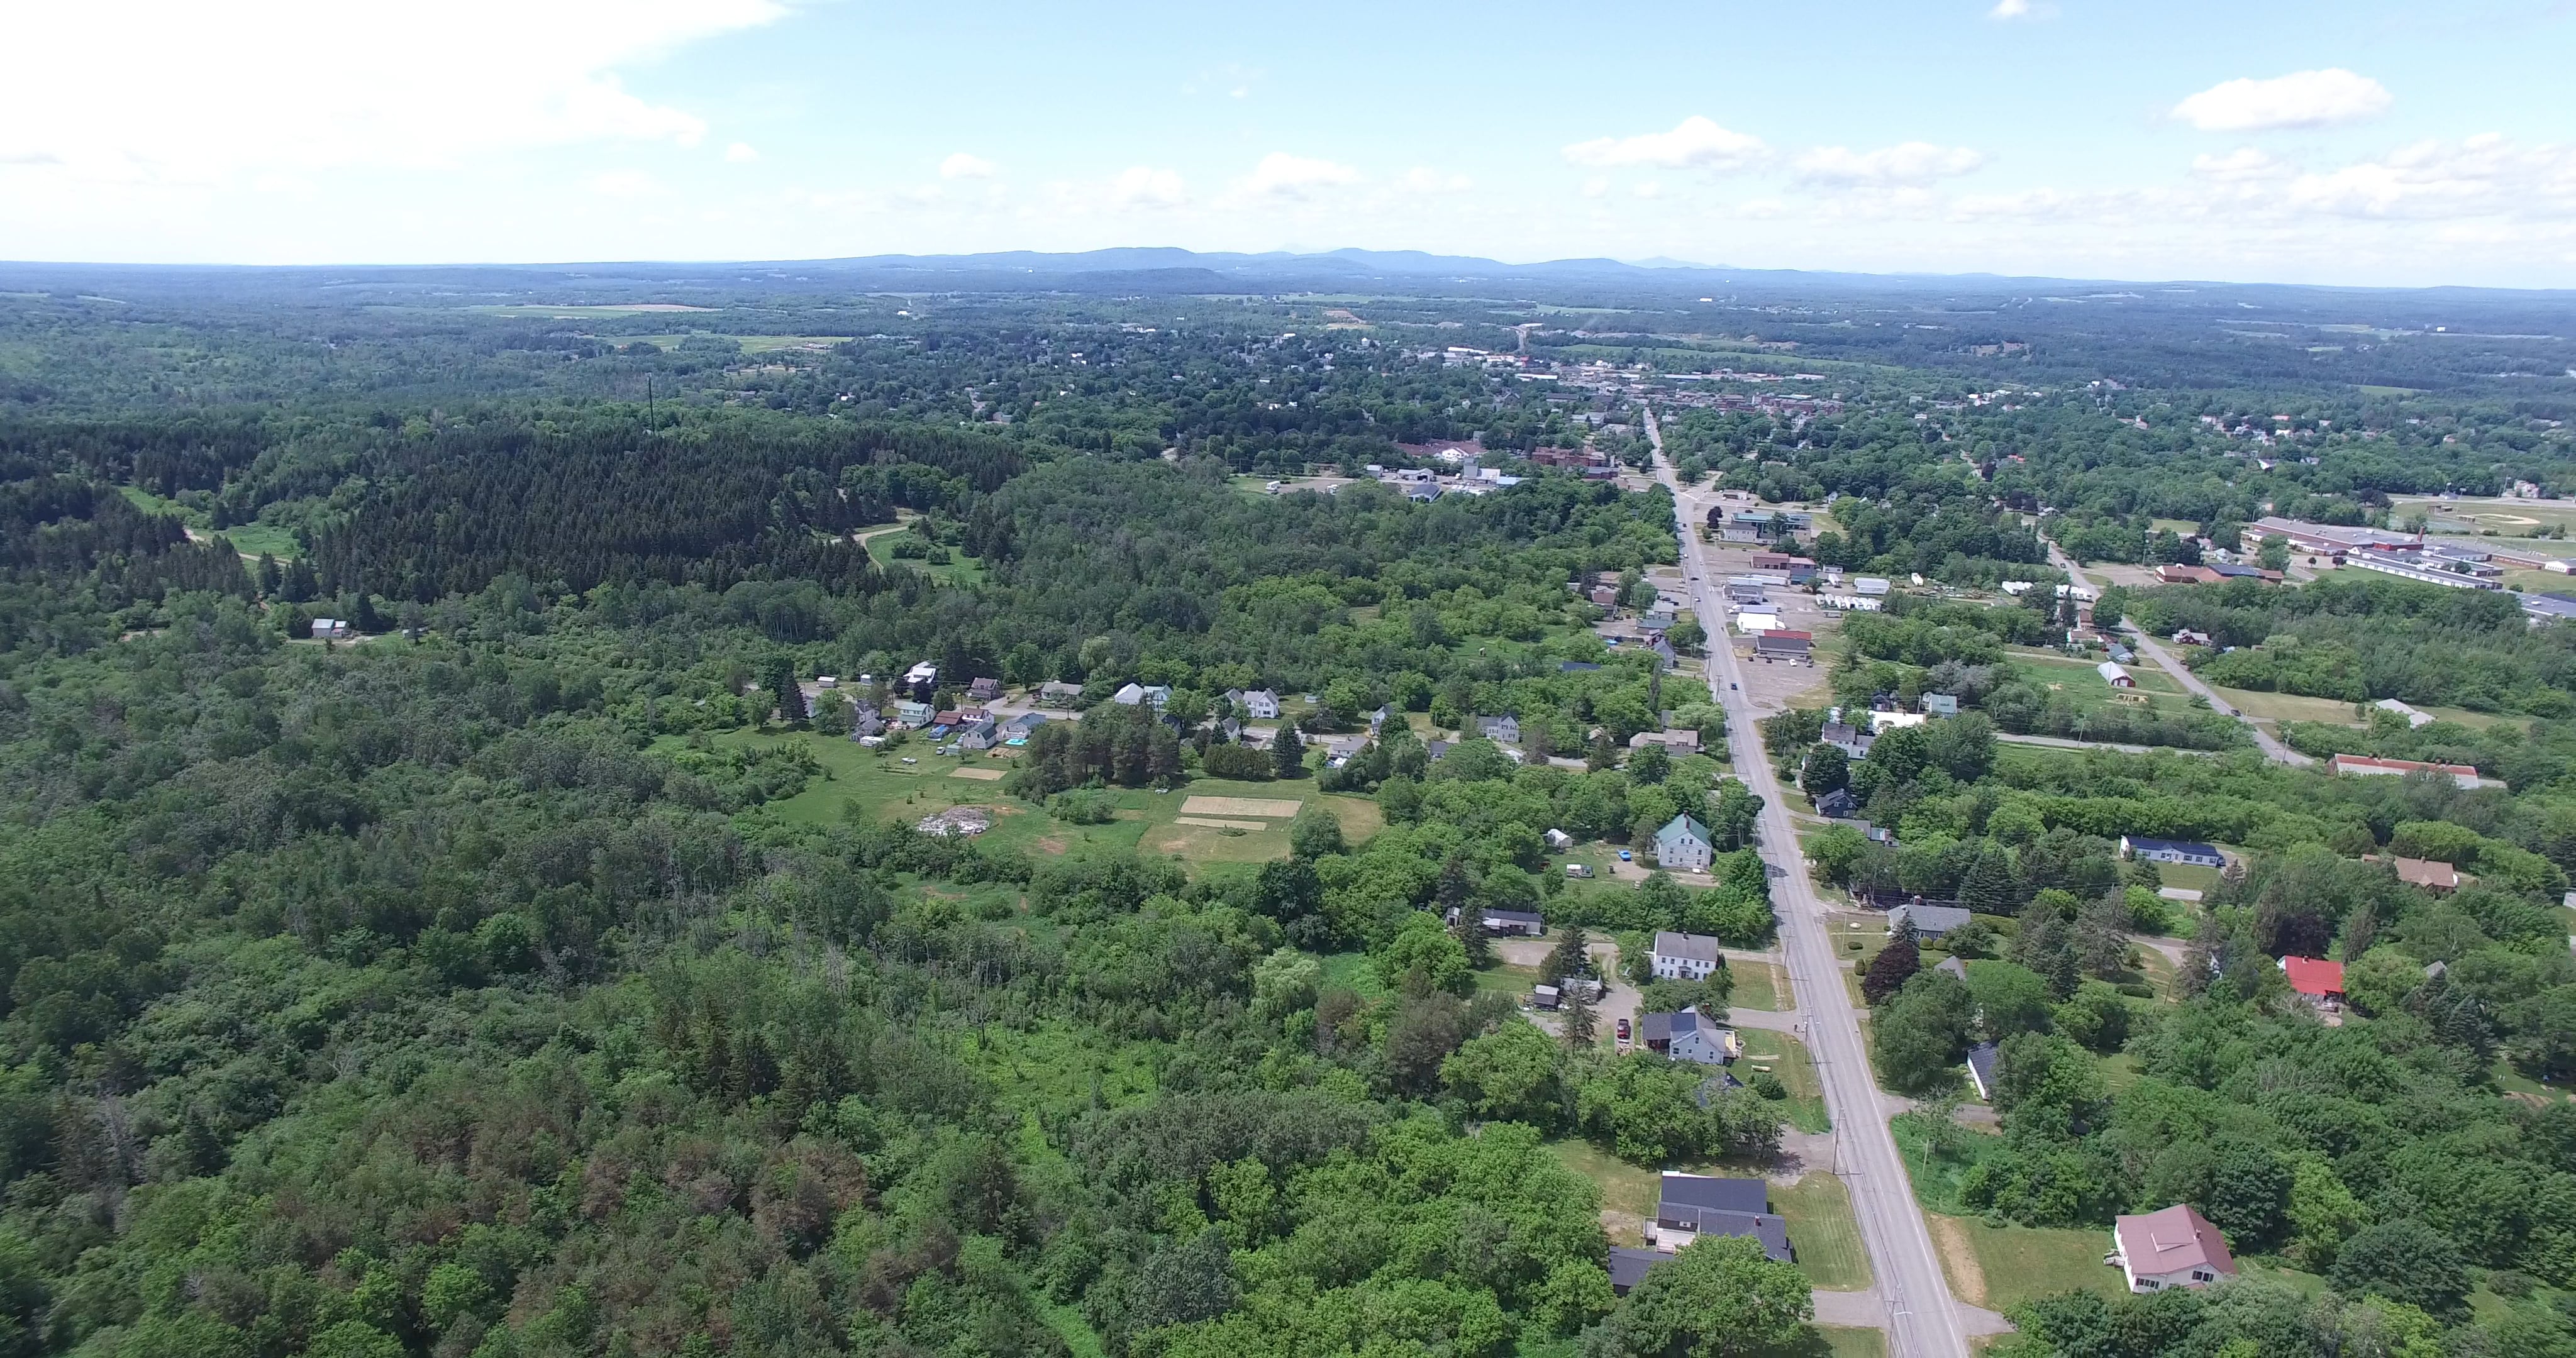 View from Drakes Hill in Houlton, Maine on Vimeo